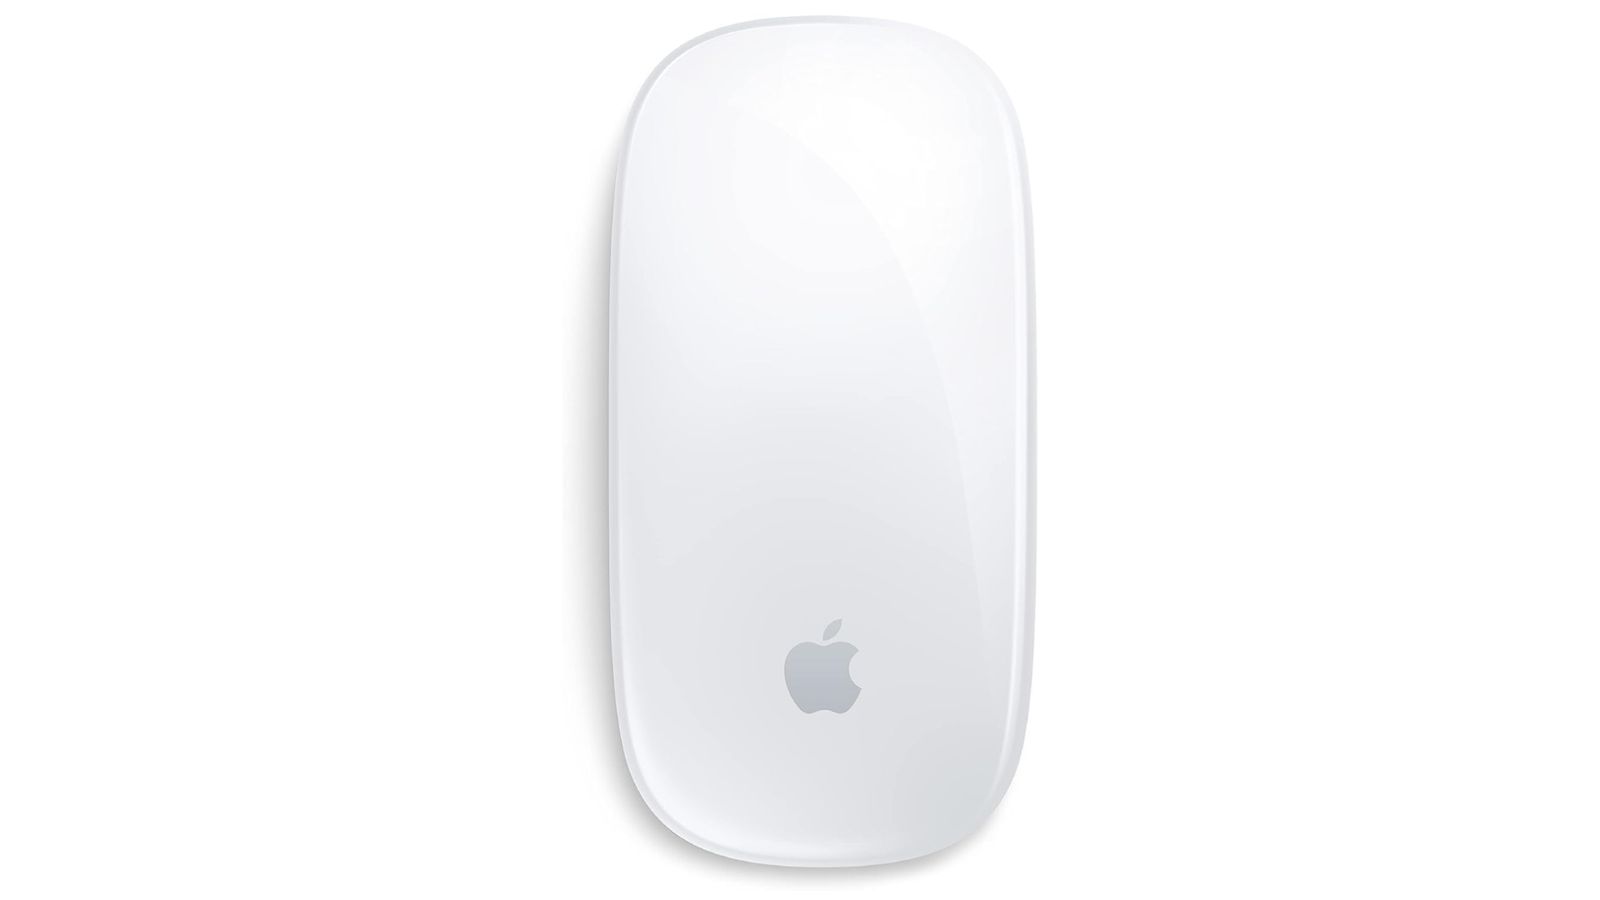 Apple Magic Mouse product image of a white wireless mouse with the grey Apple logo at the bottom.